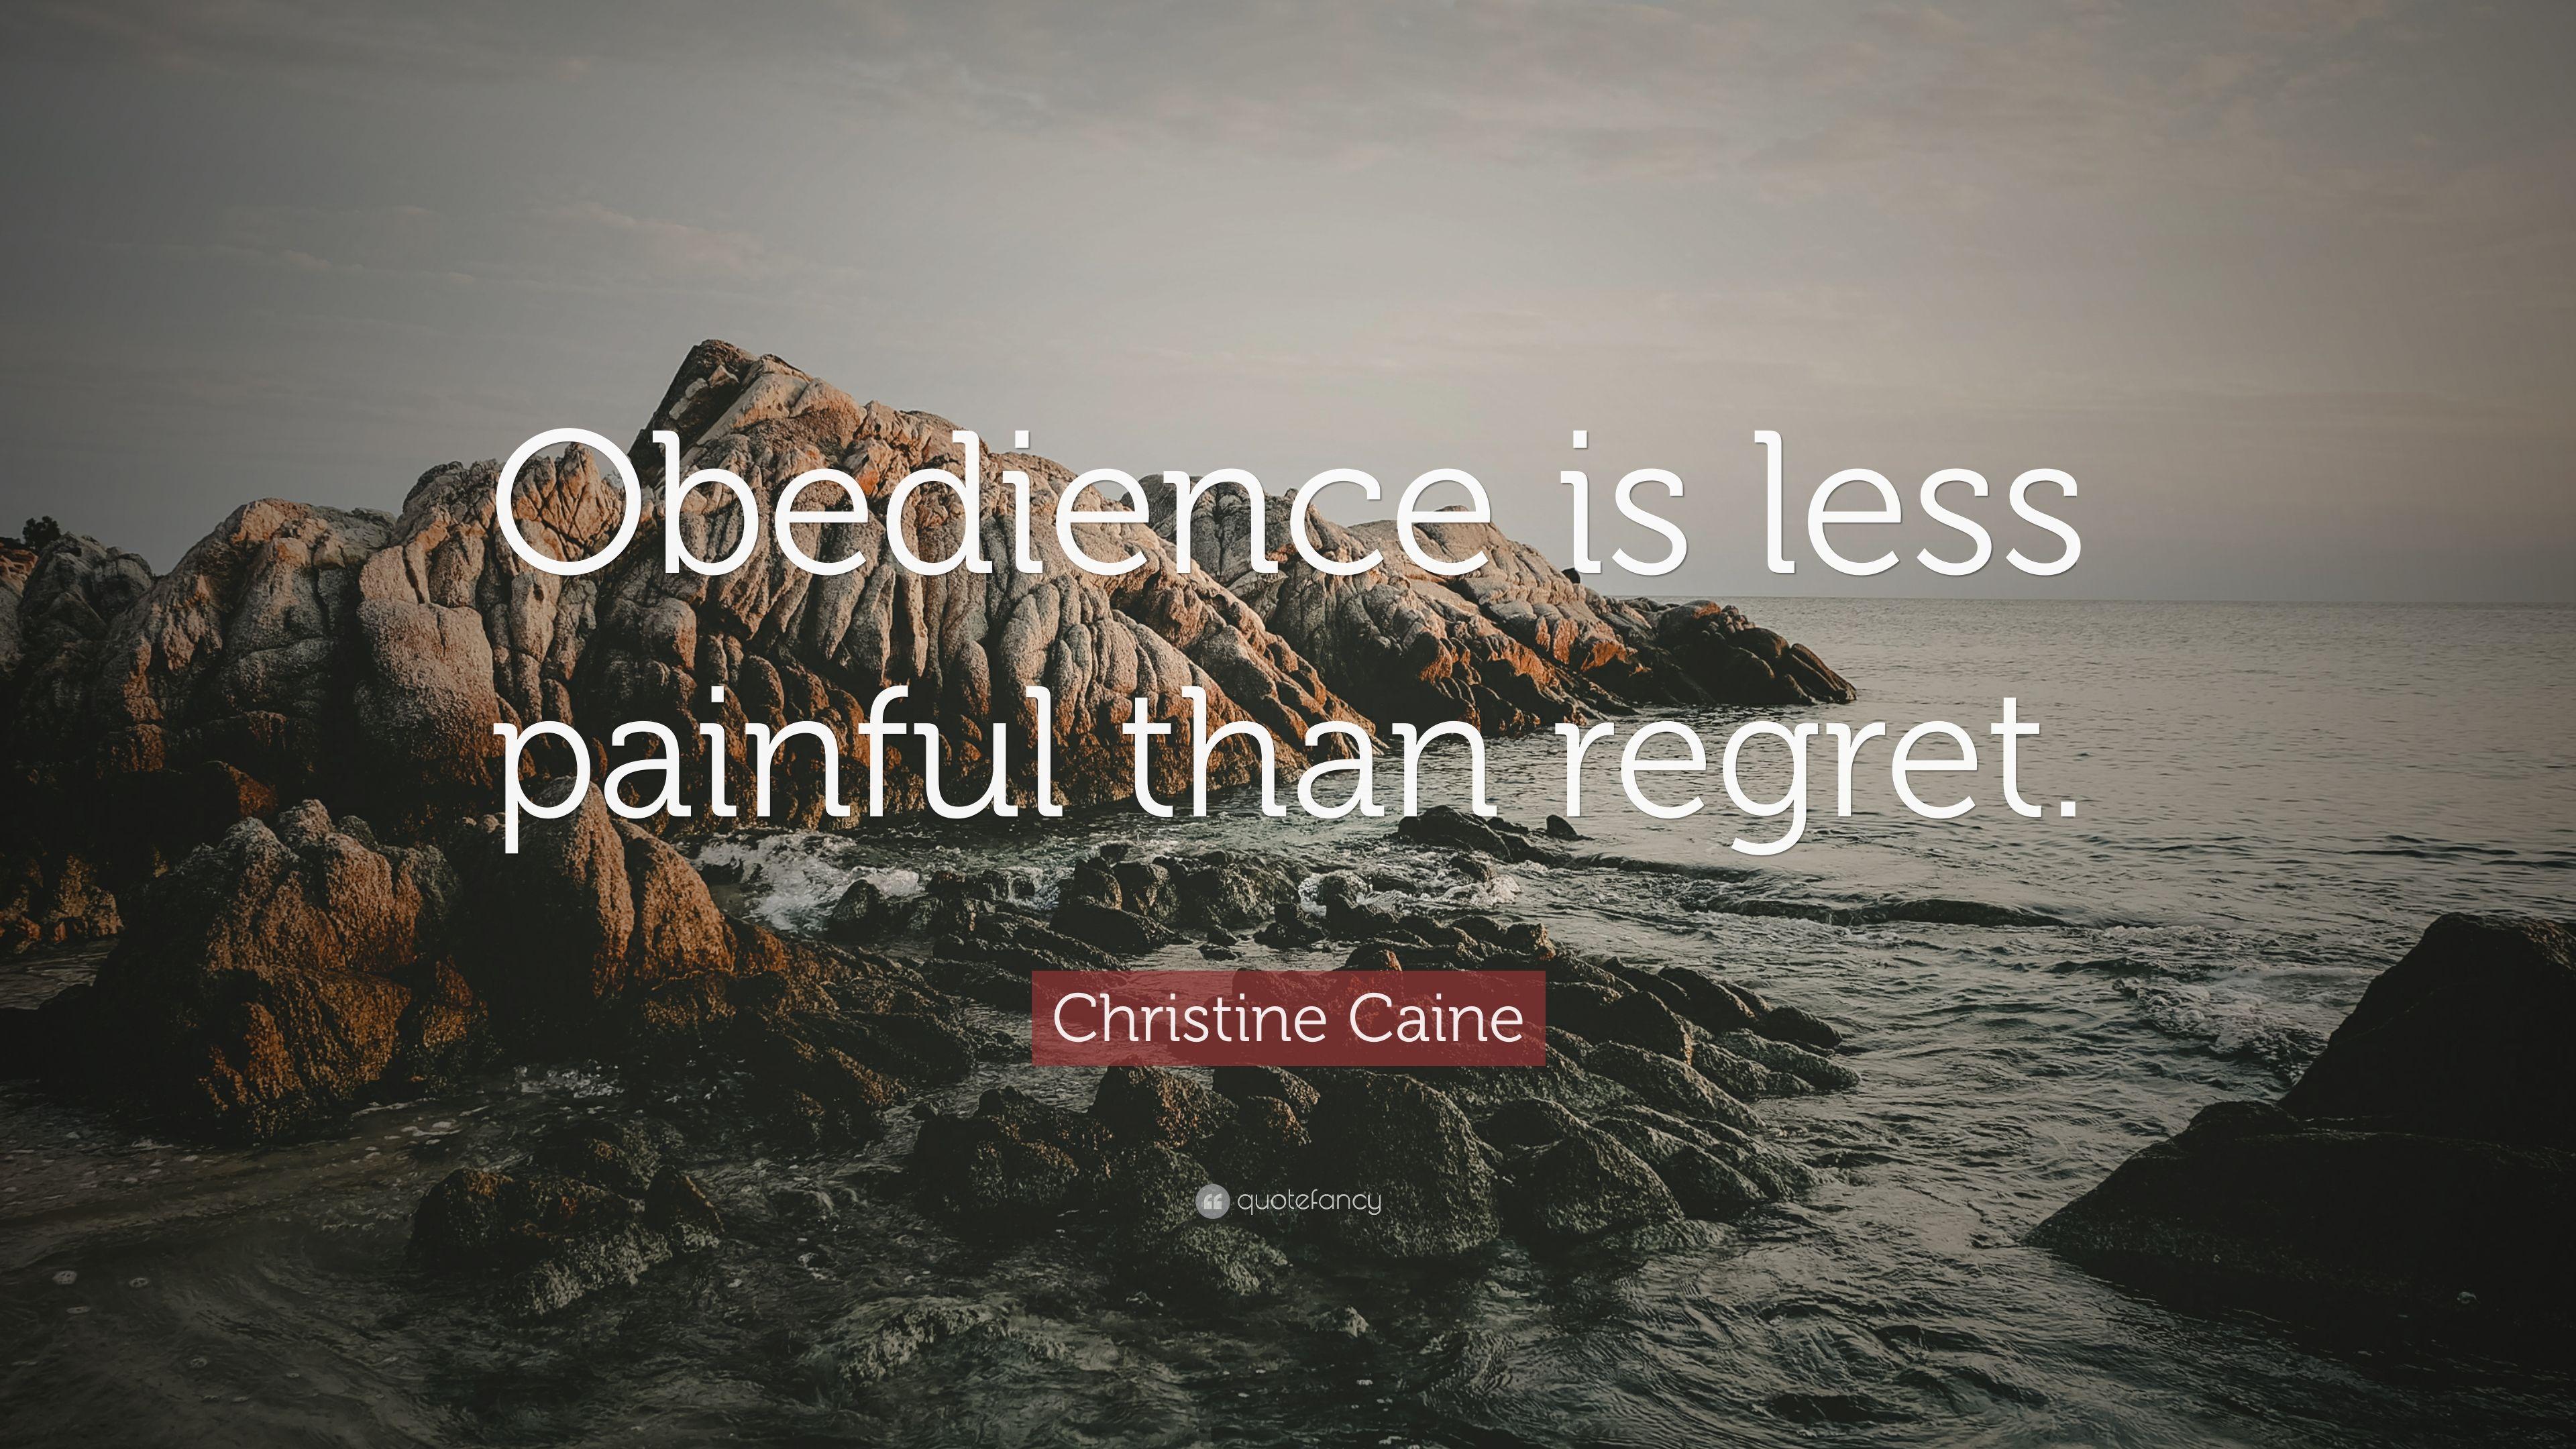 Christine Caine Quote: “Obedience is less painful than regret.” 12